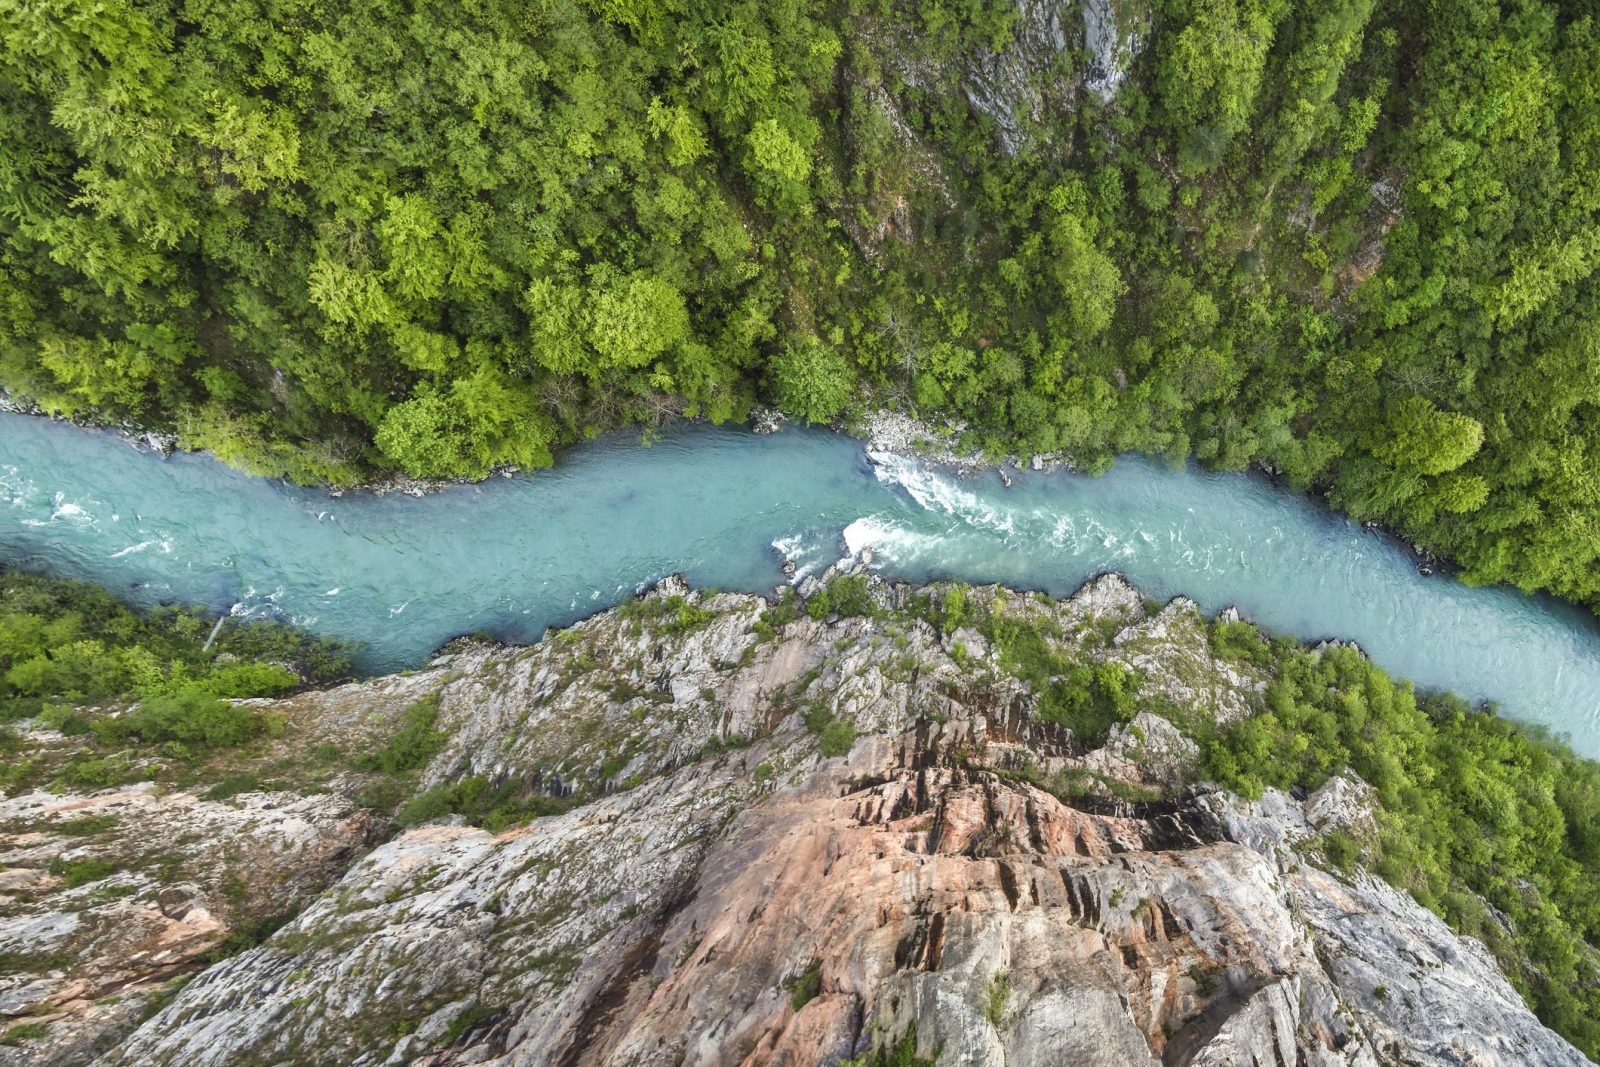 An aerial view of the Tara River Canyon in Montenegro